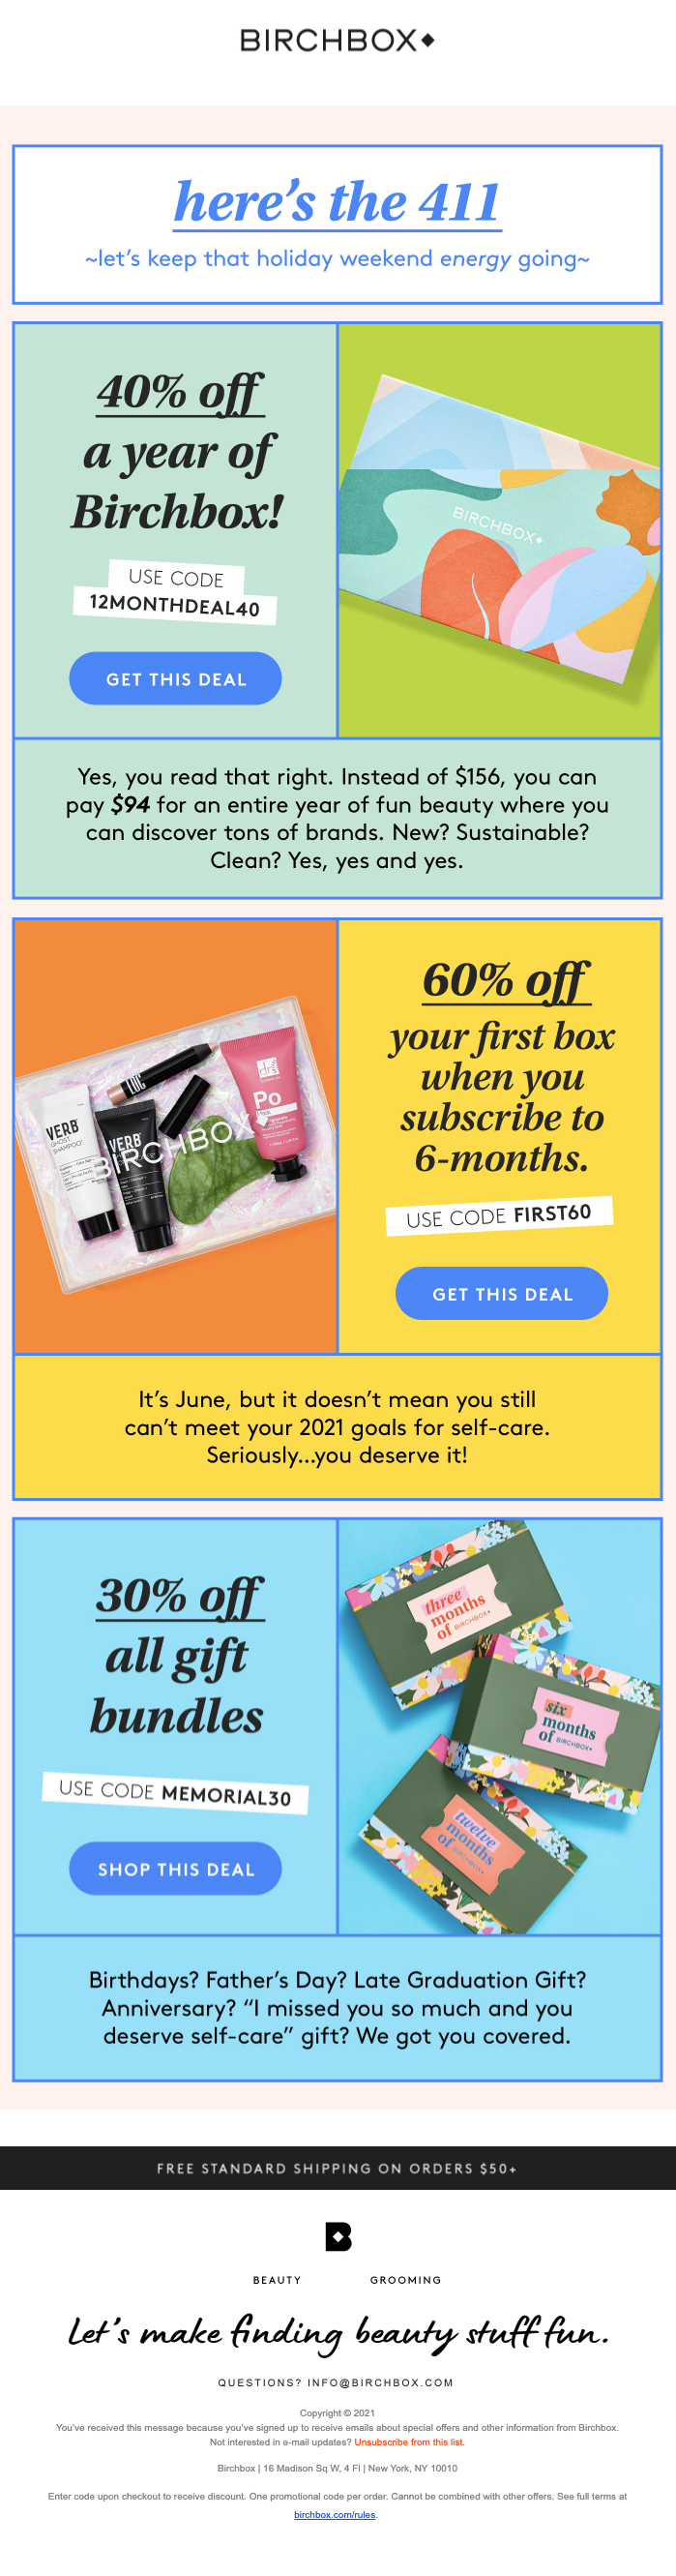 5 Email Copywriting Tips for Writing Engaging Marketing Emails